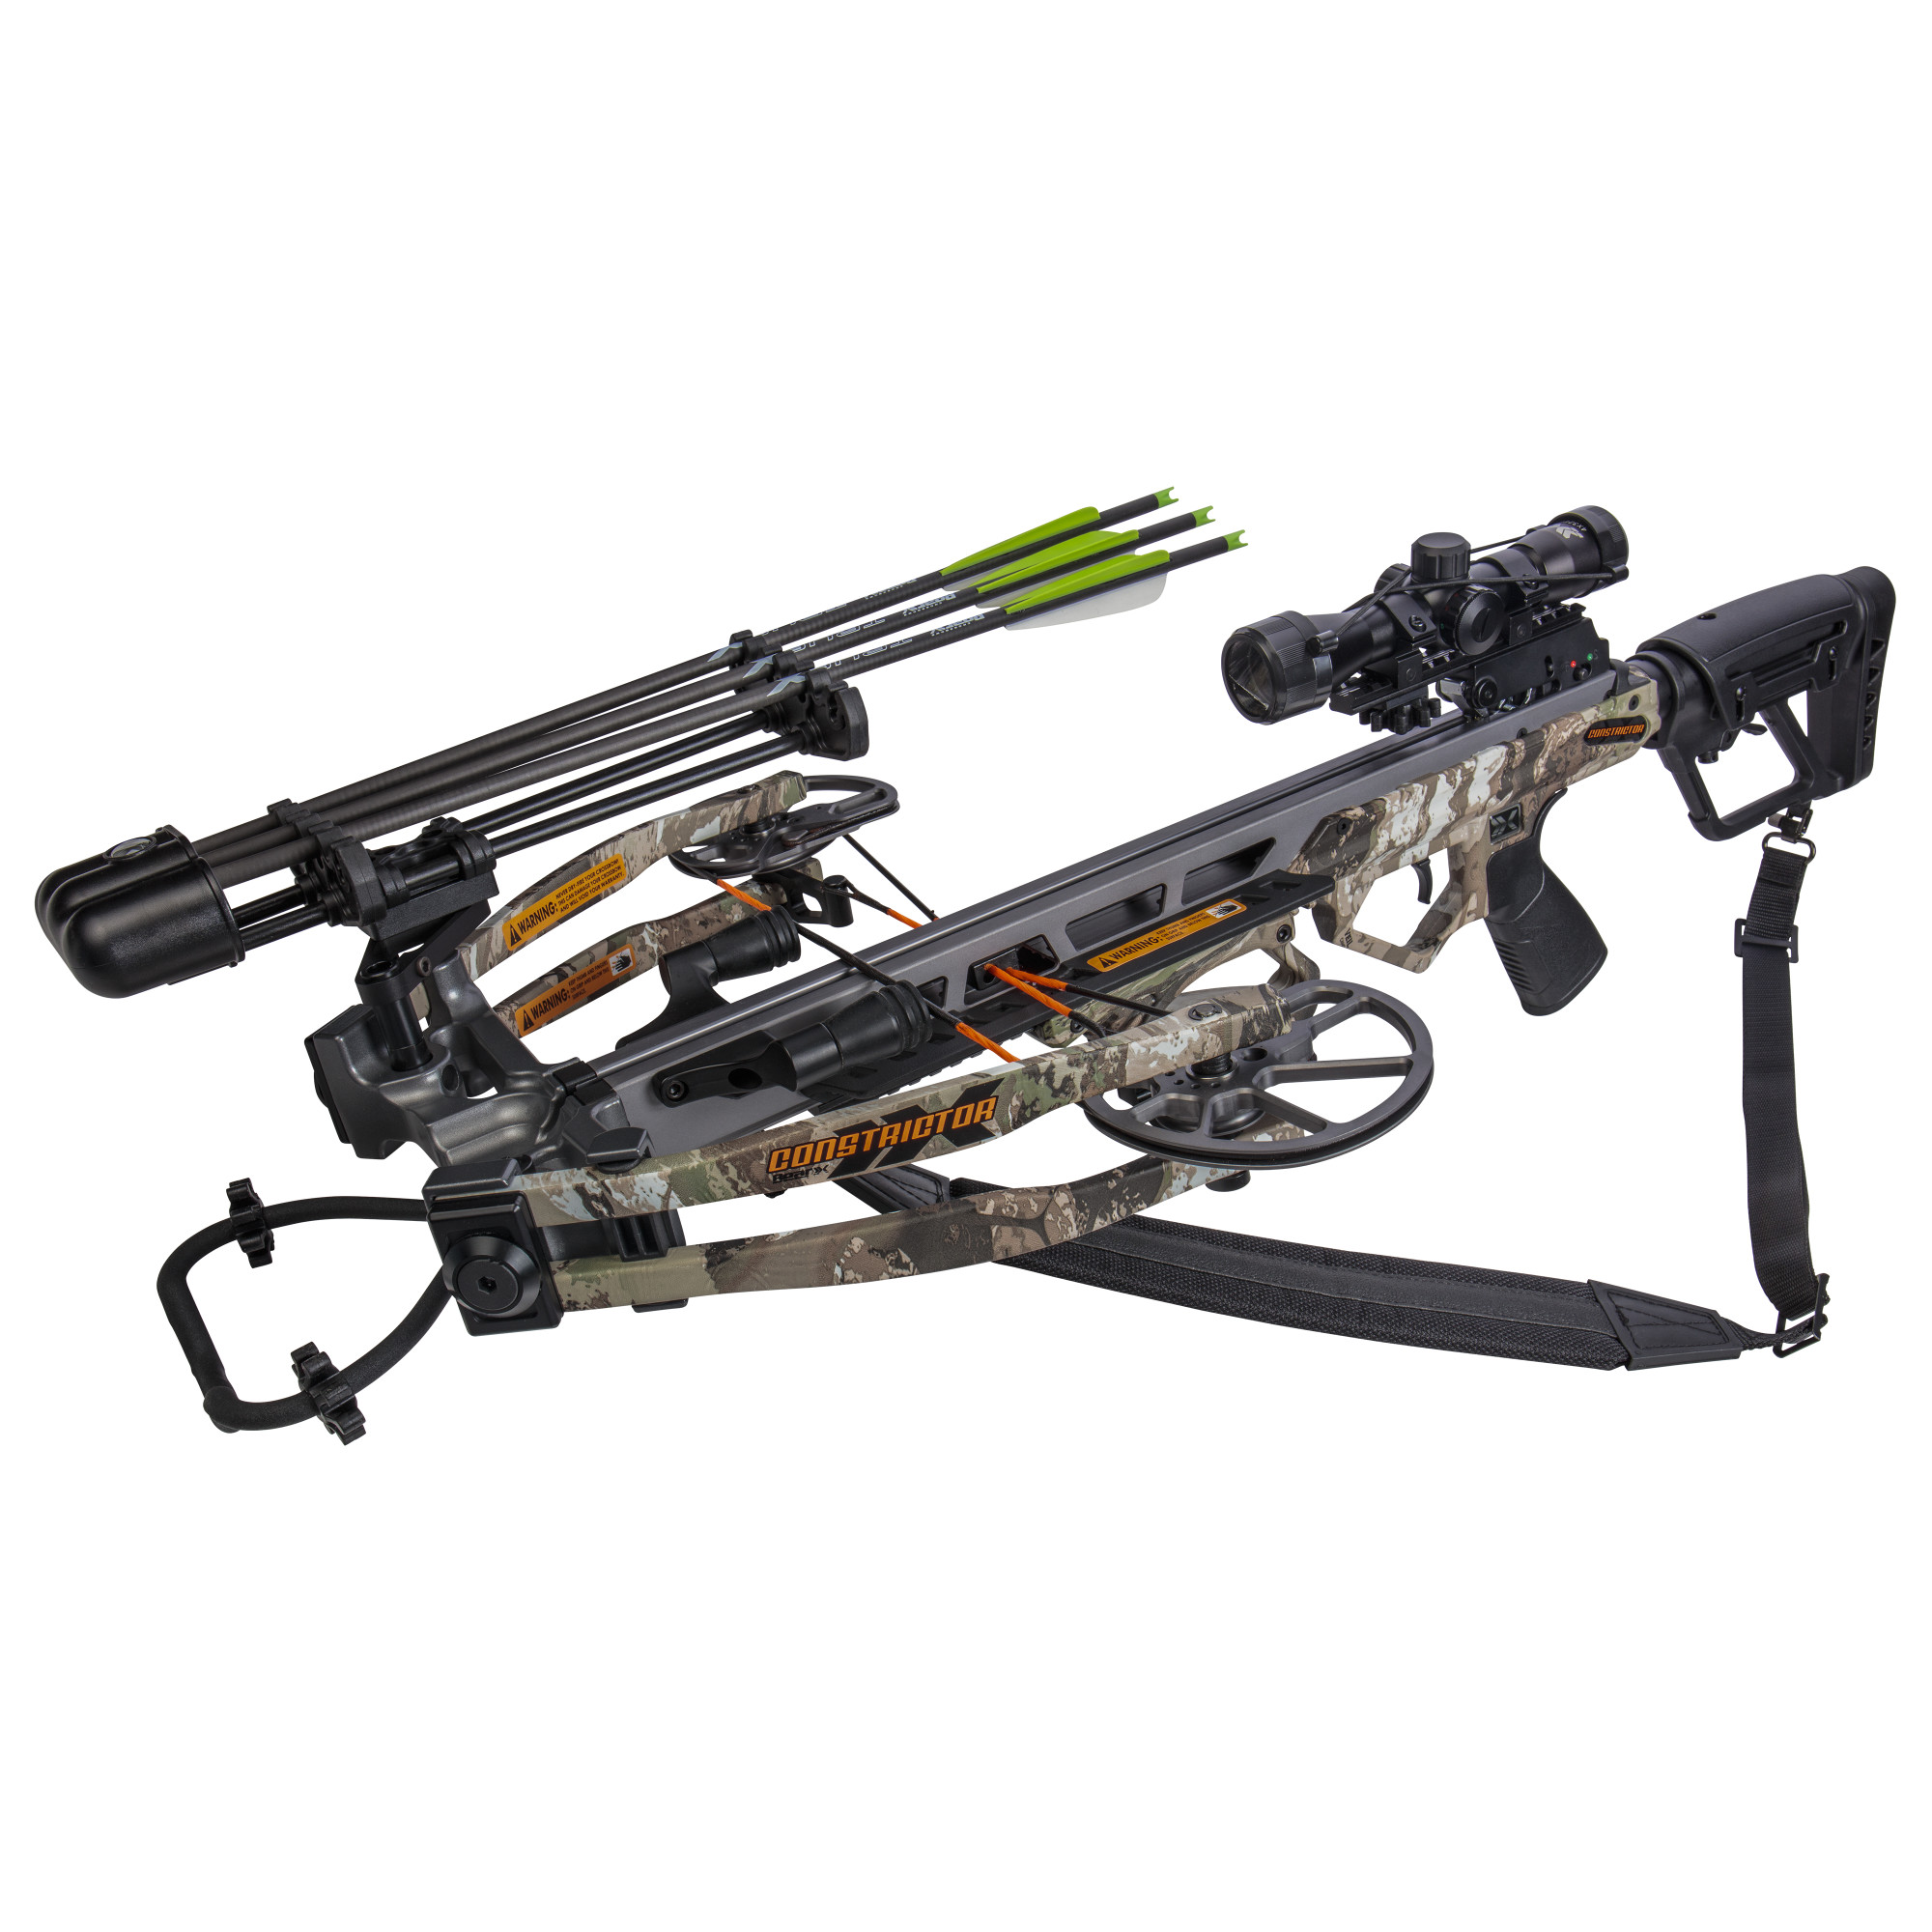 Bear X Constrictor Crossbow - image 1 of 13